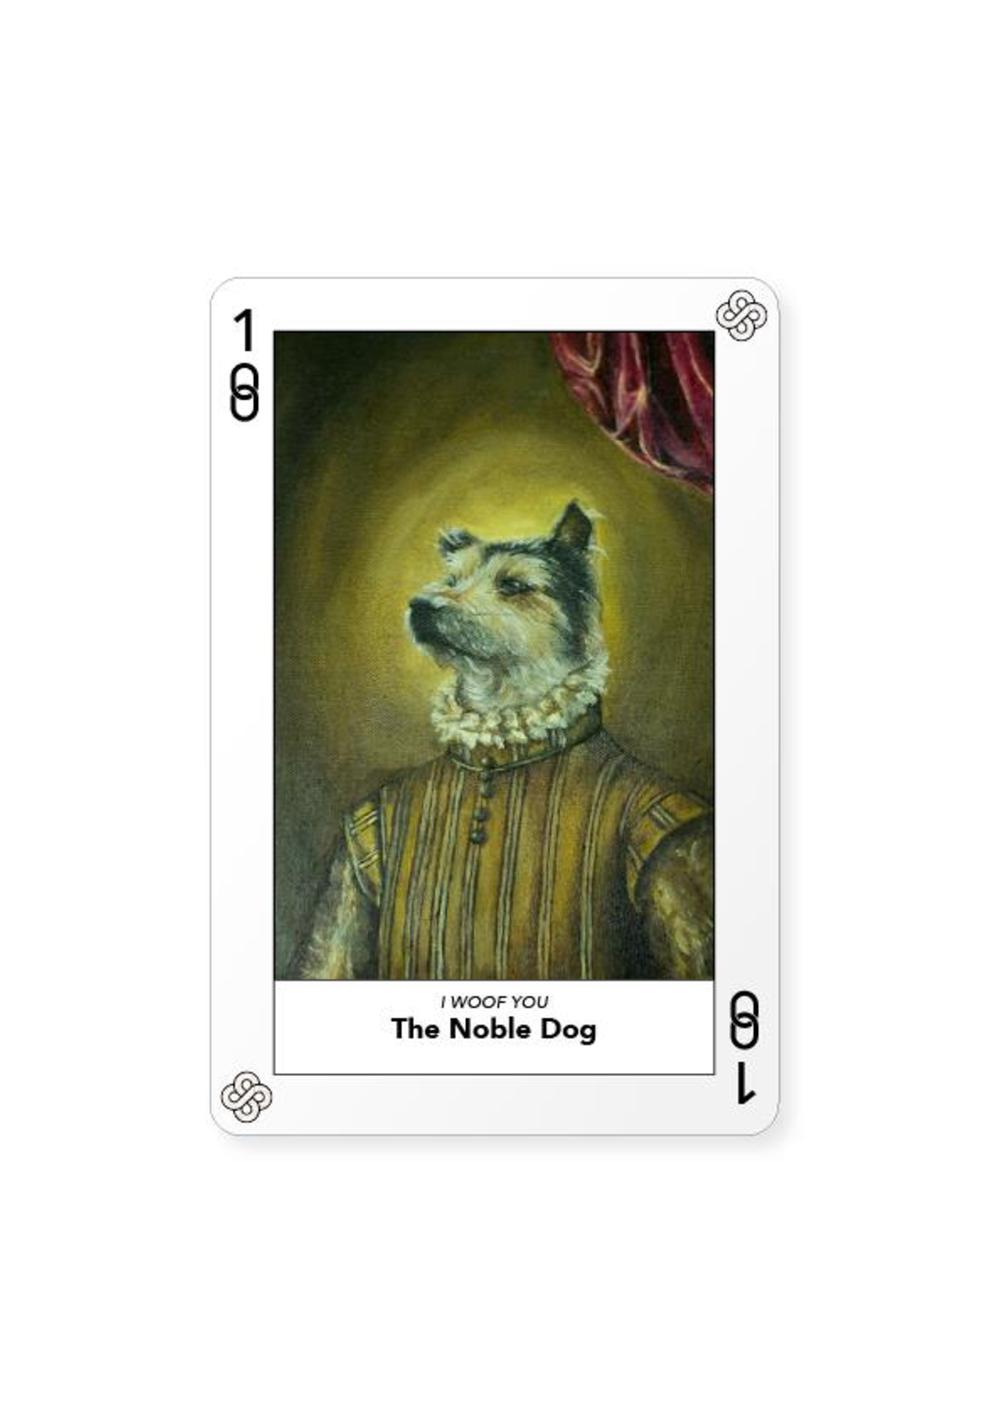 Certificate of Authenticity and Consignment - The Noble Dog